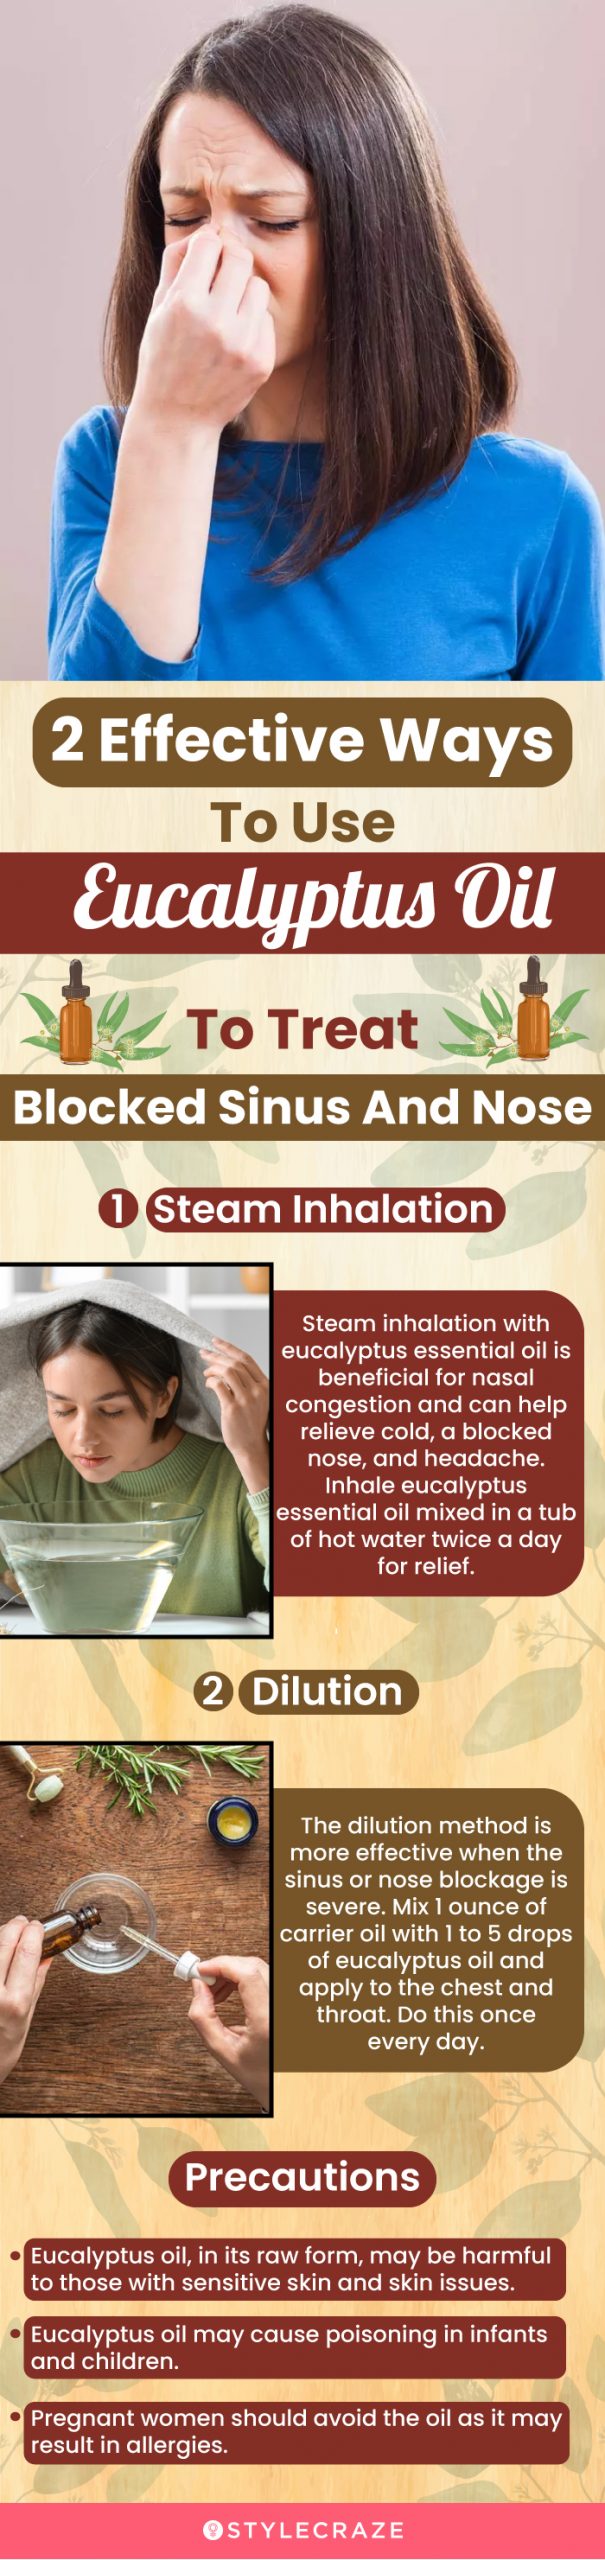 2 effective ways to use eucalyptus oil to treat blocked sinus and nose (infographic)